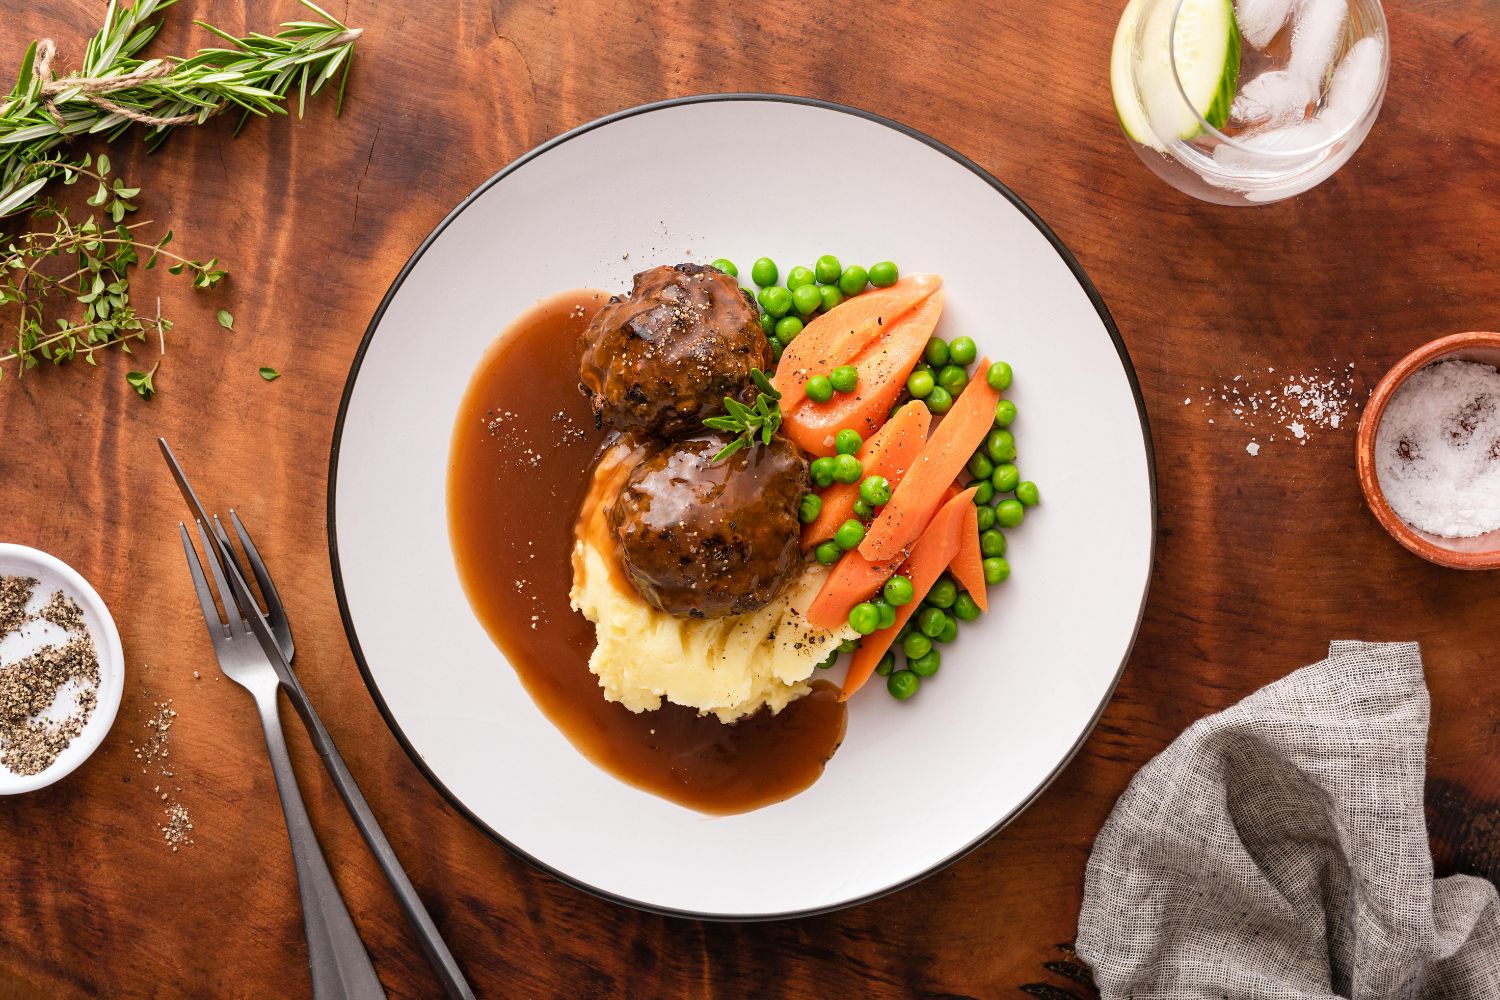 Beef rissoles with mash, carrots and peas